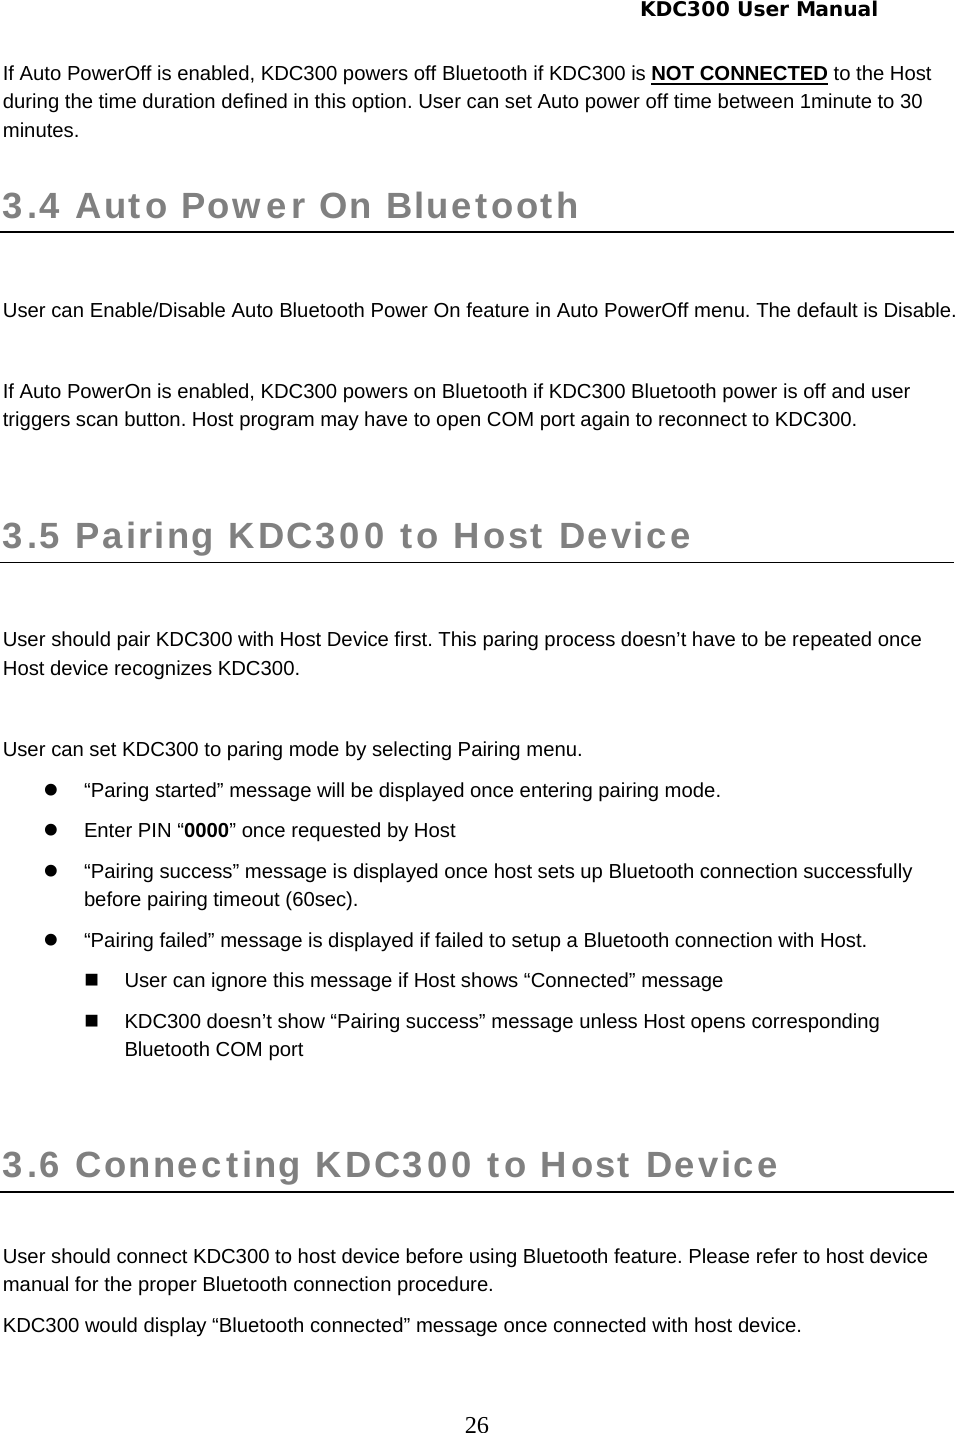     KDC300 User Manual 26 If Auto PowerOff is enabled, KDC300 powers off Bluetooth if KDC300 is NOT CONNECTED to the Host during the time duration defined in this option. User can set Auto power off time between 1minute to 30 minutes.  3.4 Auto Power On Bluetooth   User can Enable/Disable Auto Bluetooth Power On feature in Auto PowerOff menu. The default is Disable.   If Auto PowerOn is enabled, KDC300 powers on Bluetooth if KDC300 Bluetooth power is off and user triggers scan button. Host program may have to open COM port again to reconnect to KDC300.  3.5 Pairing KDC300 to Host Device   User should pair KDC300 with Host Device first. This paring process doesn’t have to be repeated once Host device recognizes KDC300.  User can set KDC300 to paring mode by selecting Pairing menu.  z  “Paring started” message will be displayed once entering pairing mode. z Enter PIN “0000” once requested by Host z  “Pairing success” message is displayed once host sets up Bluetooth connection successfully before pairing timeout (60sec). z  “Pairing failed” message is displayed if failed to setup a Bluetooth connection with Host.   User can ignore this message if Host shows “Connected” message   KDC300 doesn’t show “Pairing success” message unless Host opens corresponding Bluetooth COM port  3.6 Connecting KDC300 to Host Device  User should connect KDC300 to host device before using Bluetooth feature. Please refer to host device manual for the proper Bluetooth connection procedure. KDC300 would display “Bluetooth connected” message once connected with host device.  